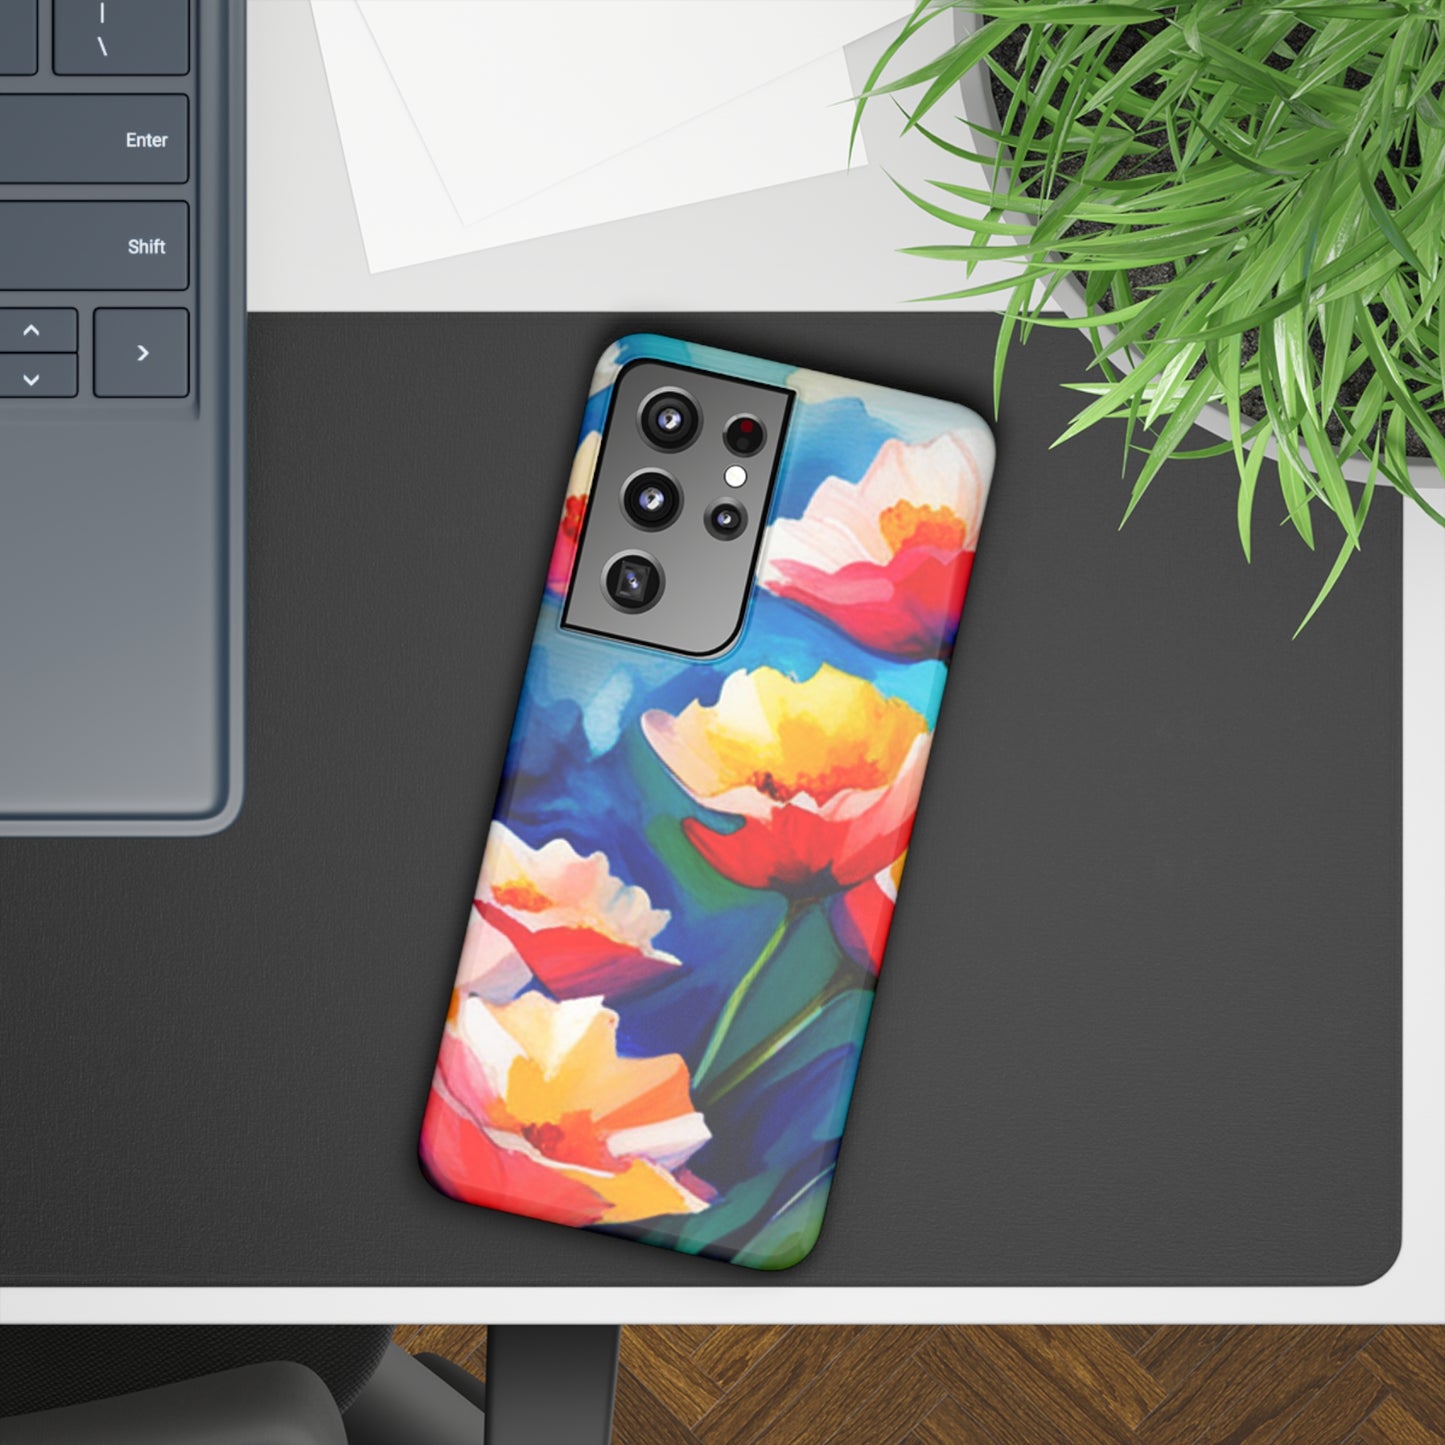 Floral Slim Cases for iPhone and Samsung Galaxy Phones iPhone 13  12 Pro Max Samsung Galaxy S21 Phone Cases